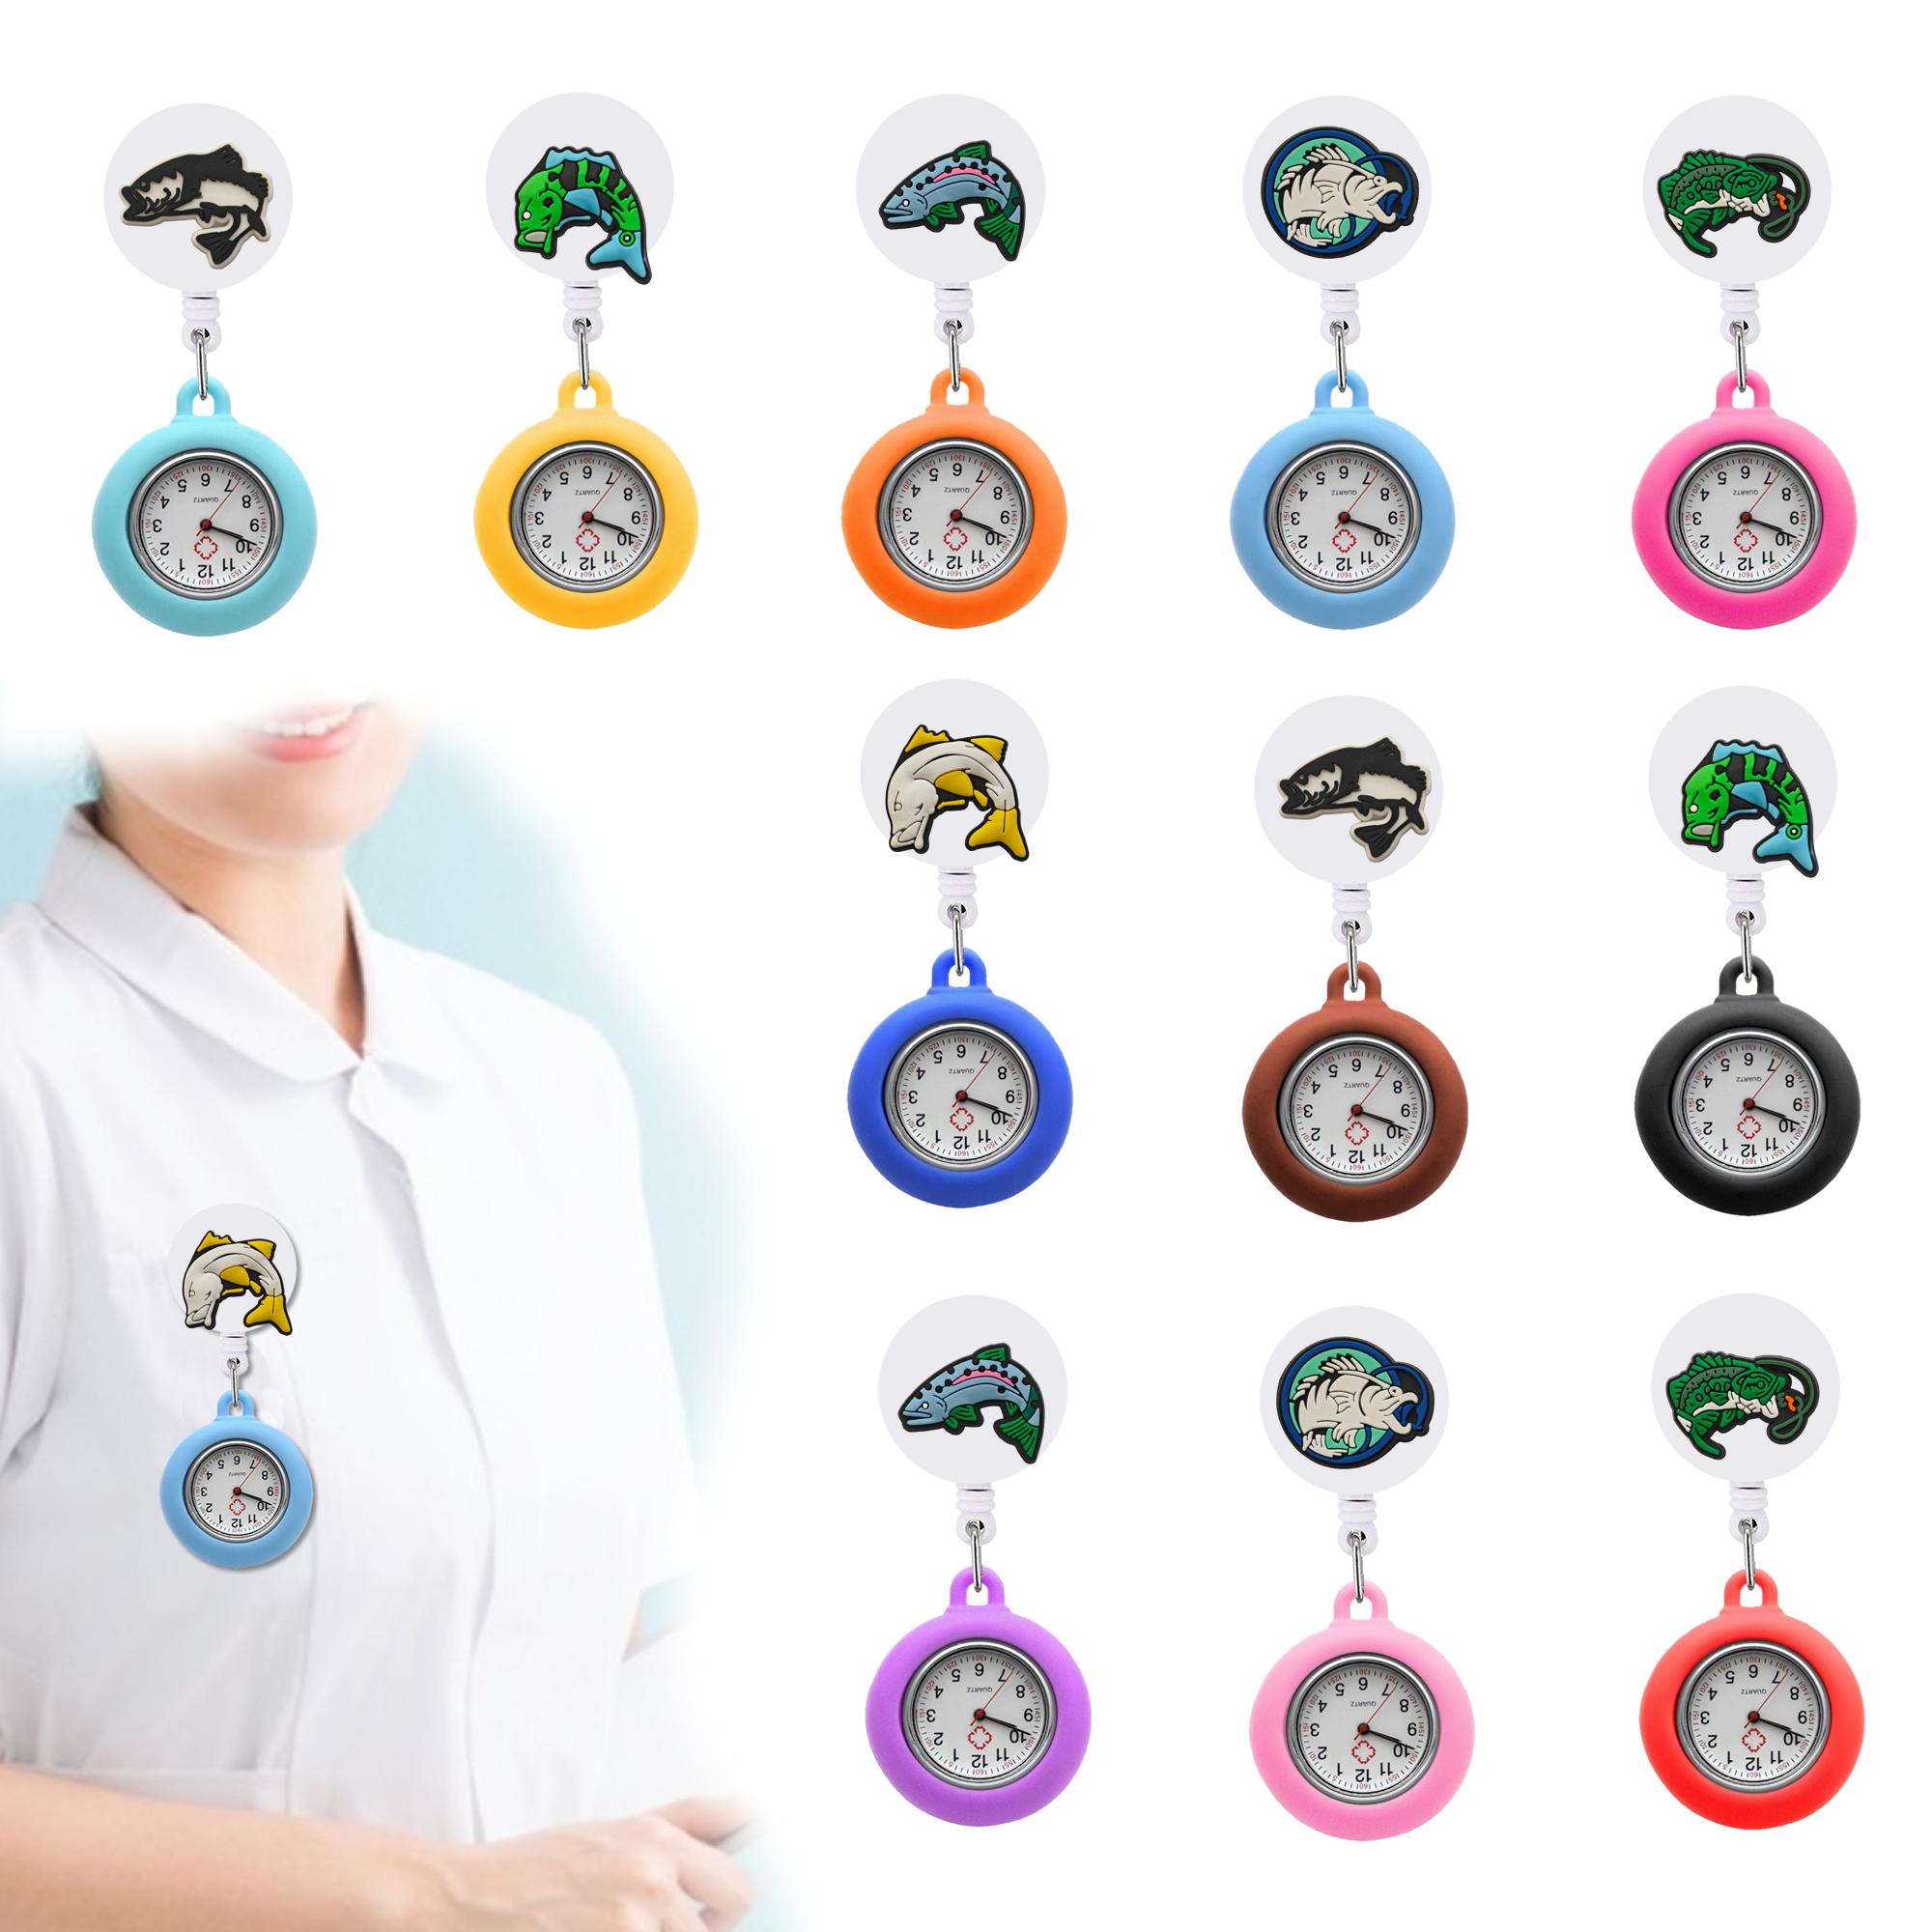 Childrens Watches Fish And Clip Pocket Nurse Watch Brooch Fob Watche For With Sile Case Hang Medicine Clock Retractable Hospital Med Ot1Ty